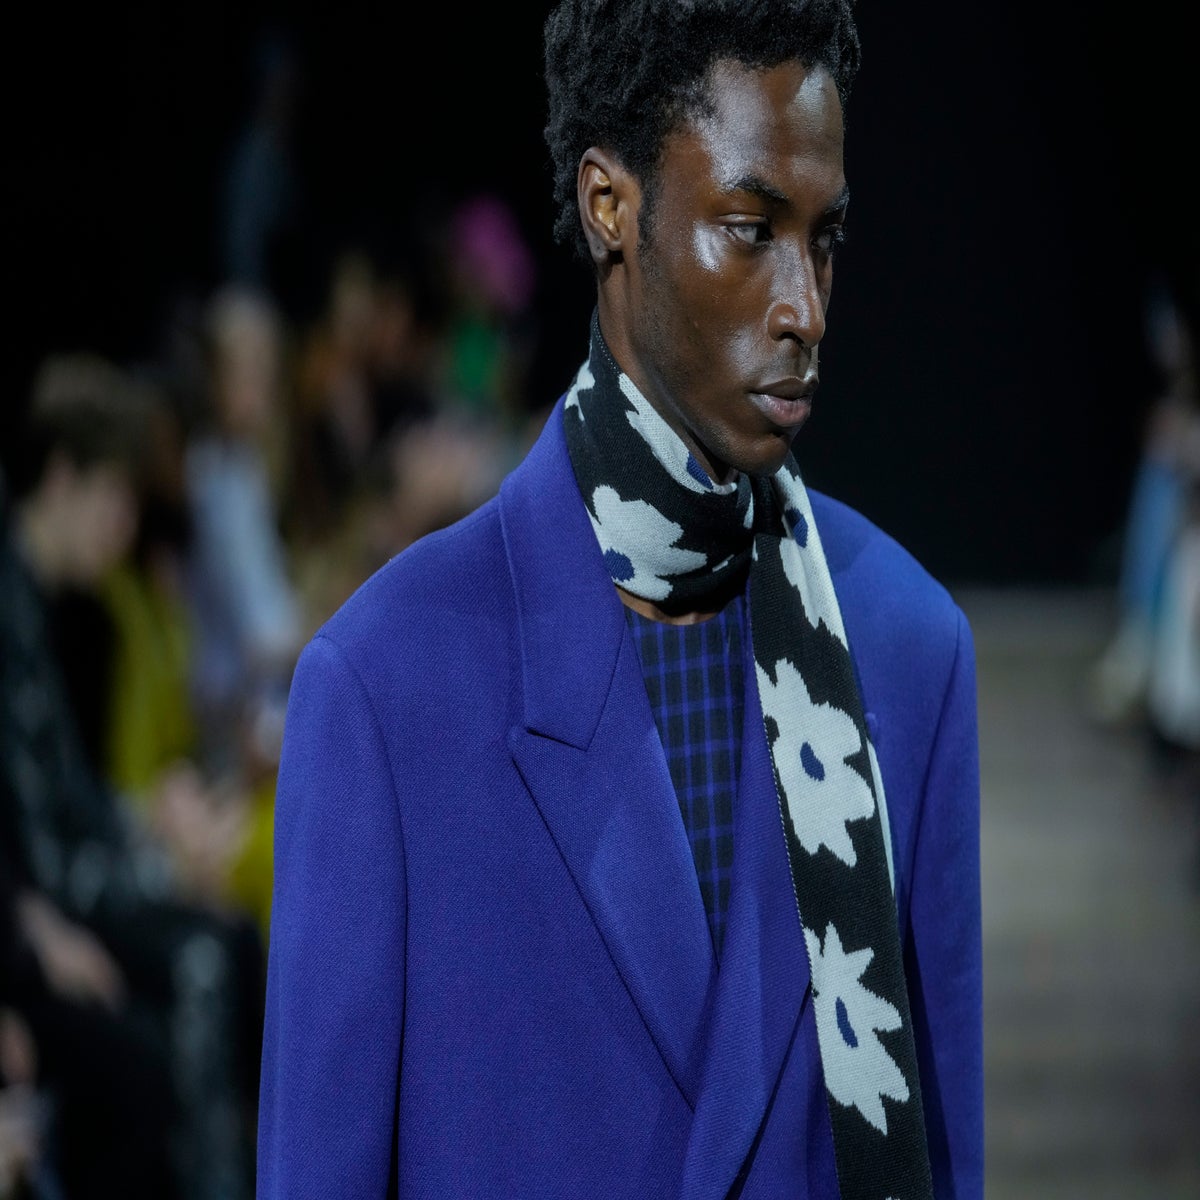 Paris Fashion Week: Highlights from the Fall-Winter 2023 menswear shows